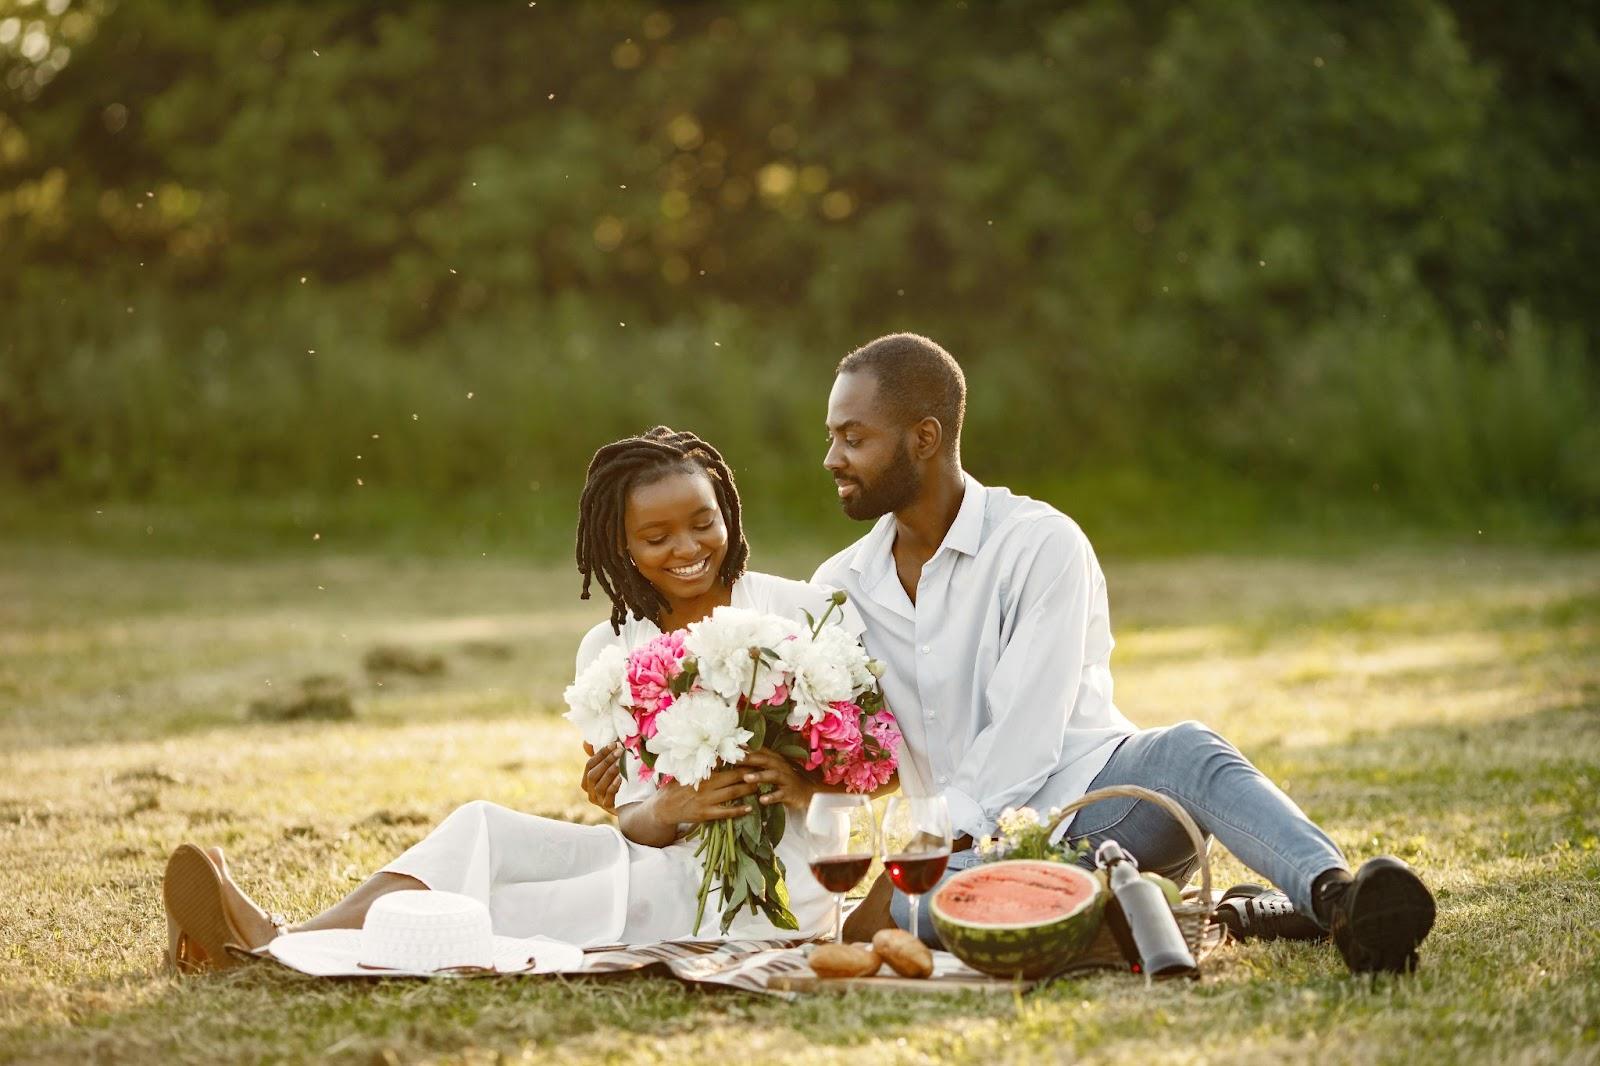 Budget-Friendly Celebrations: 10 Affordable Anniversary Date Ideas